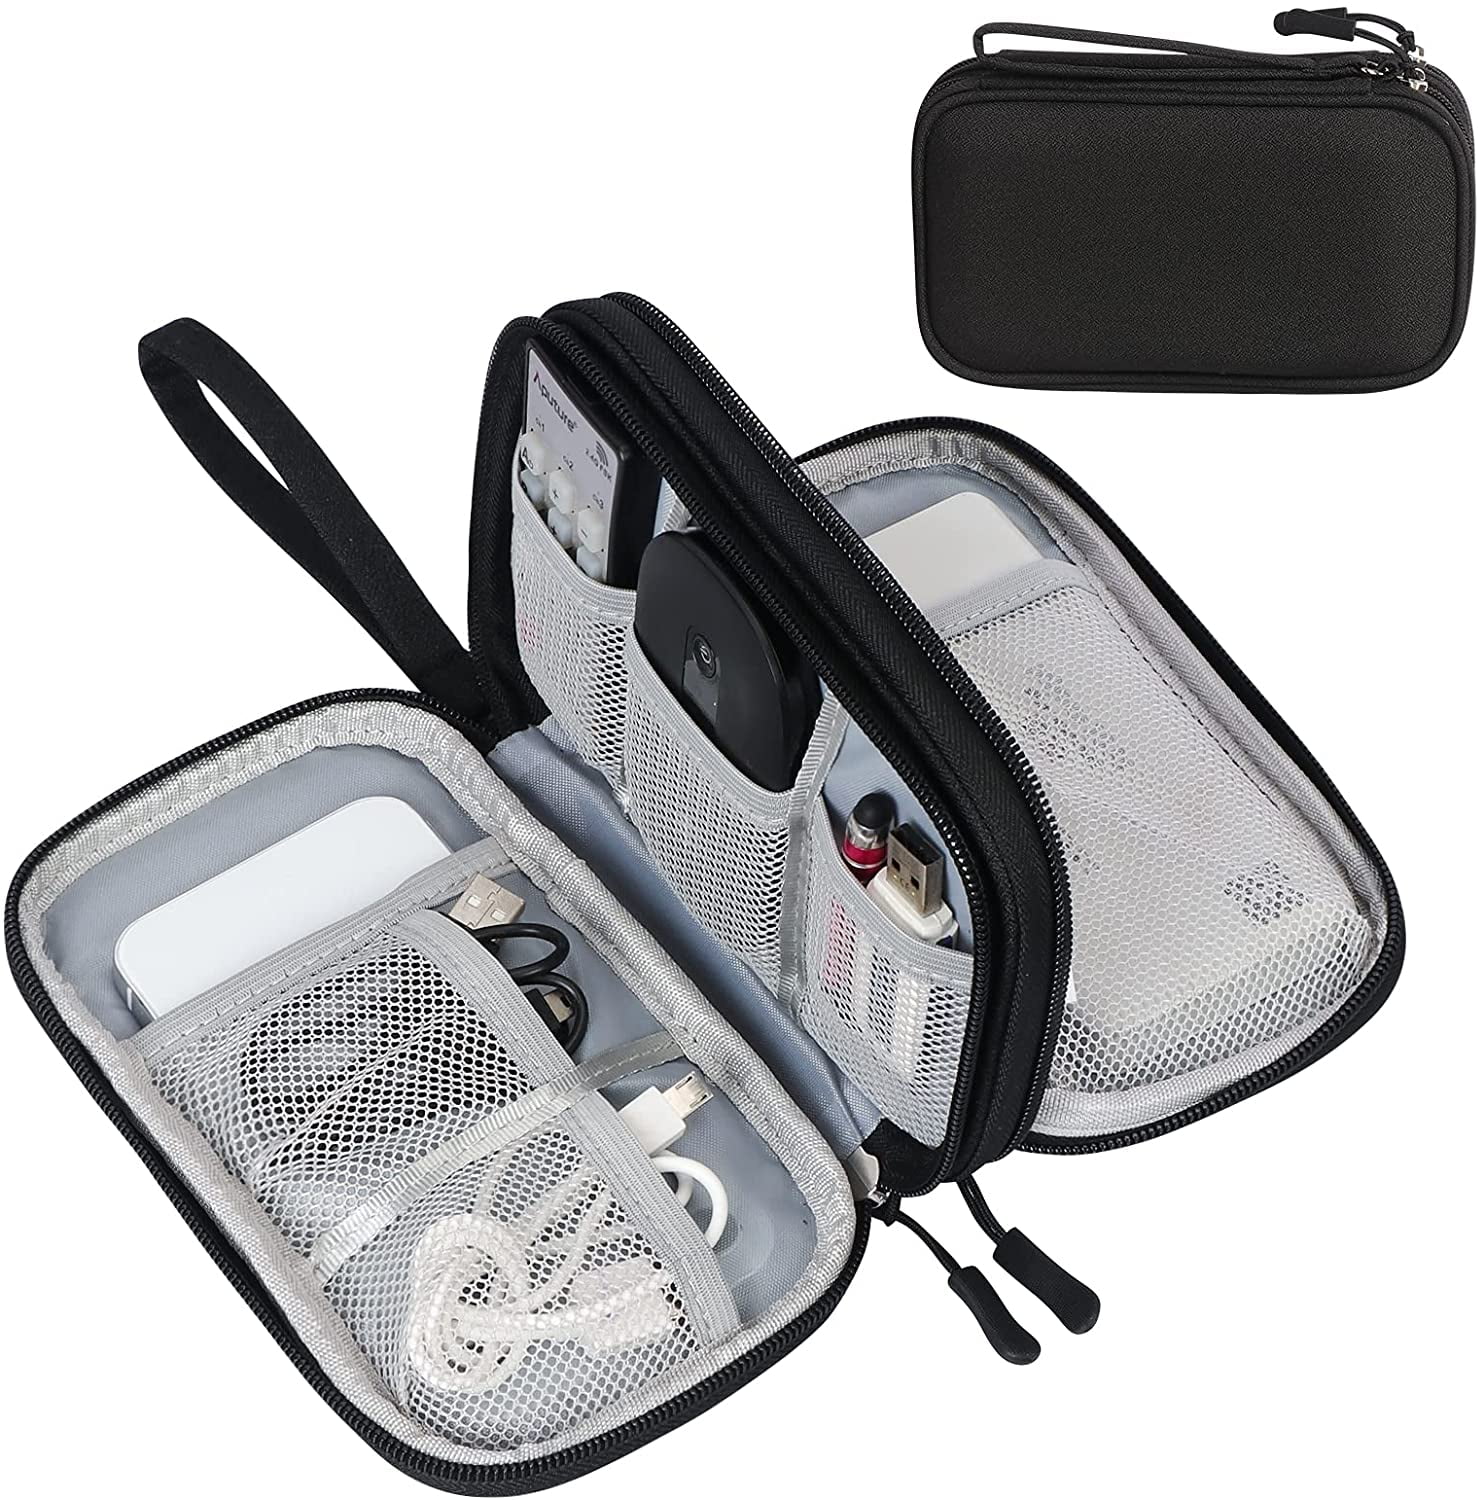 Electronics Accessories Organizer Bag Grey Silhouette Dandelion Hearts On White Electronics Organizer Electronic Accessories Bag Storage Bag of Cases for Cable Sd Card Charger USB Phone